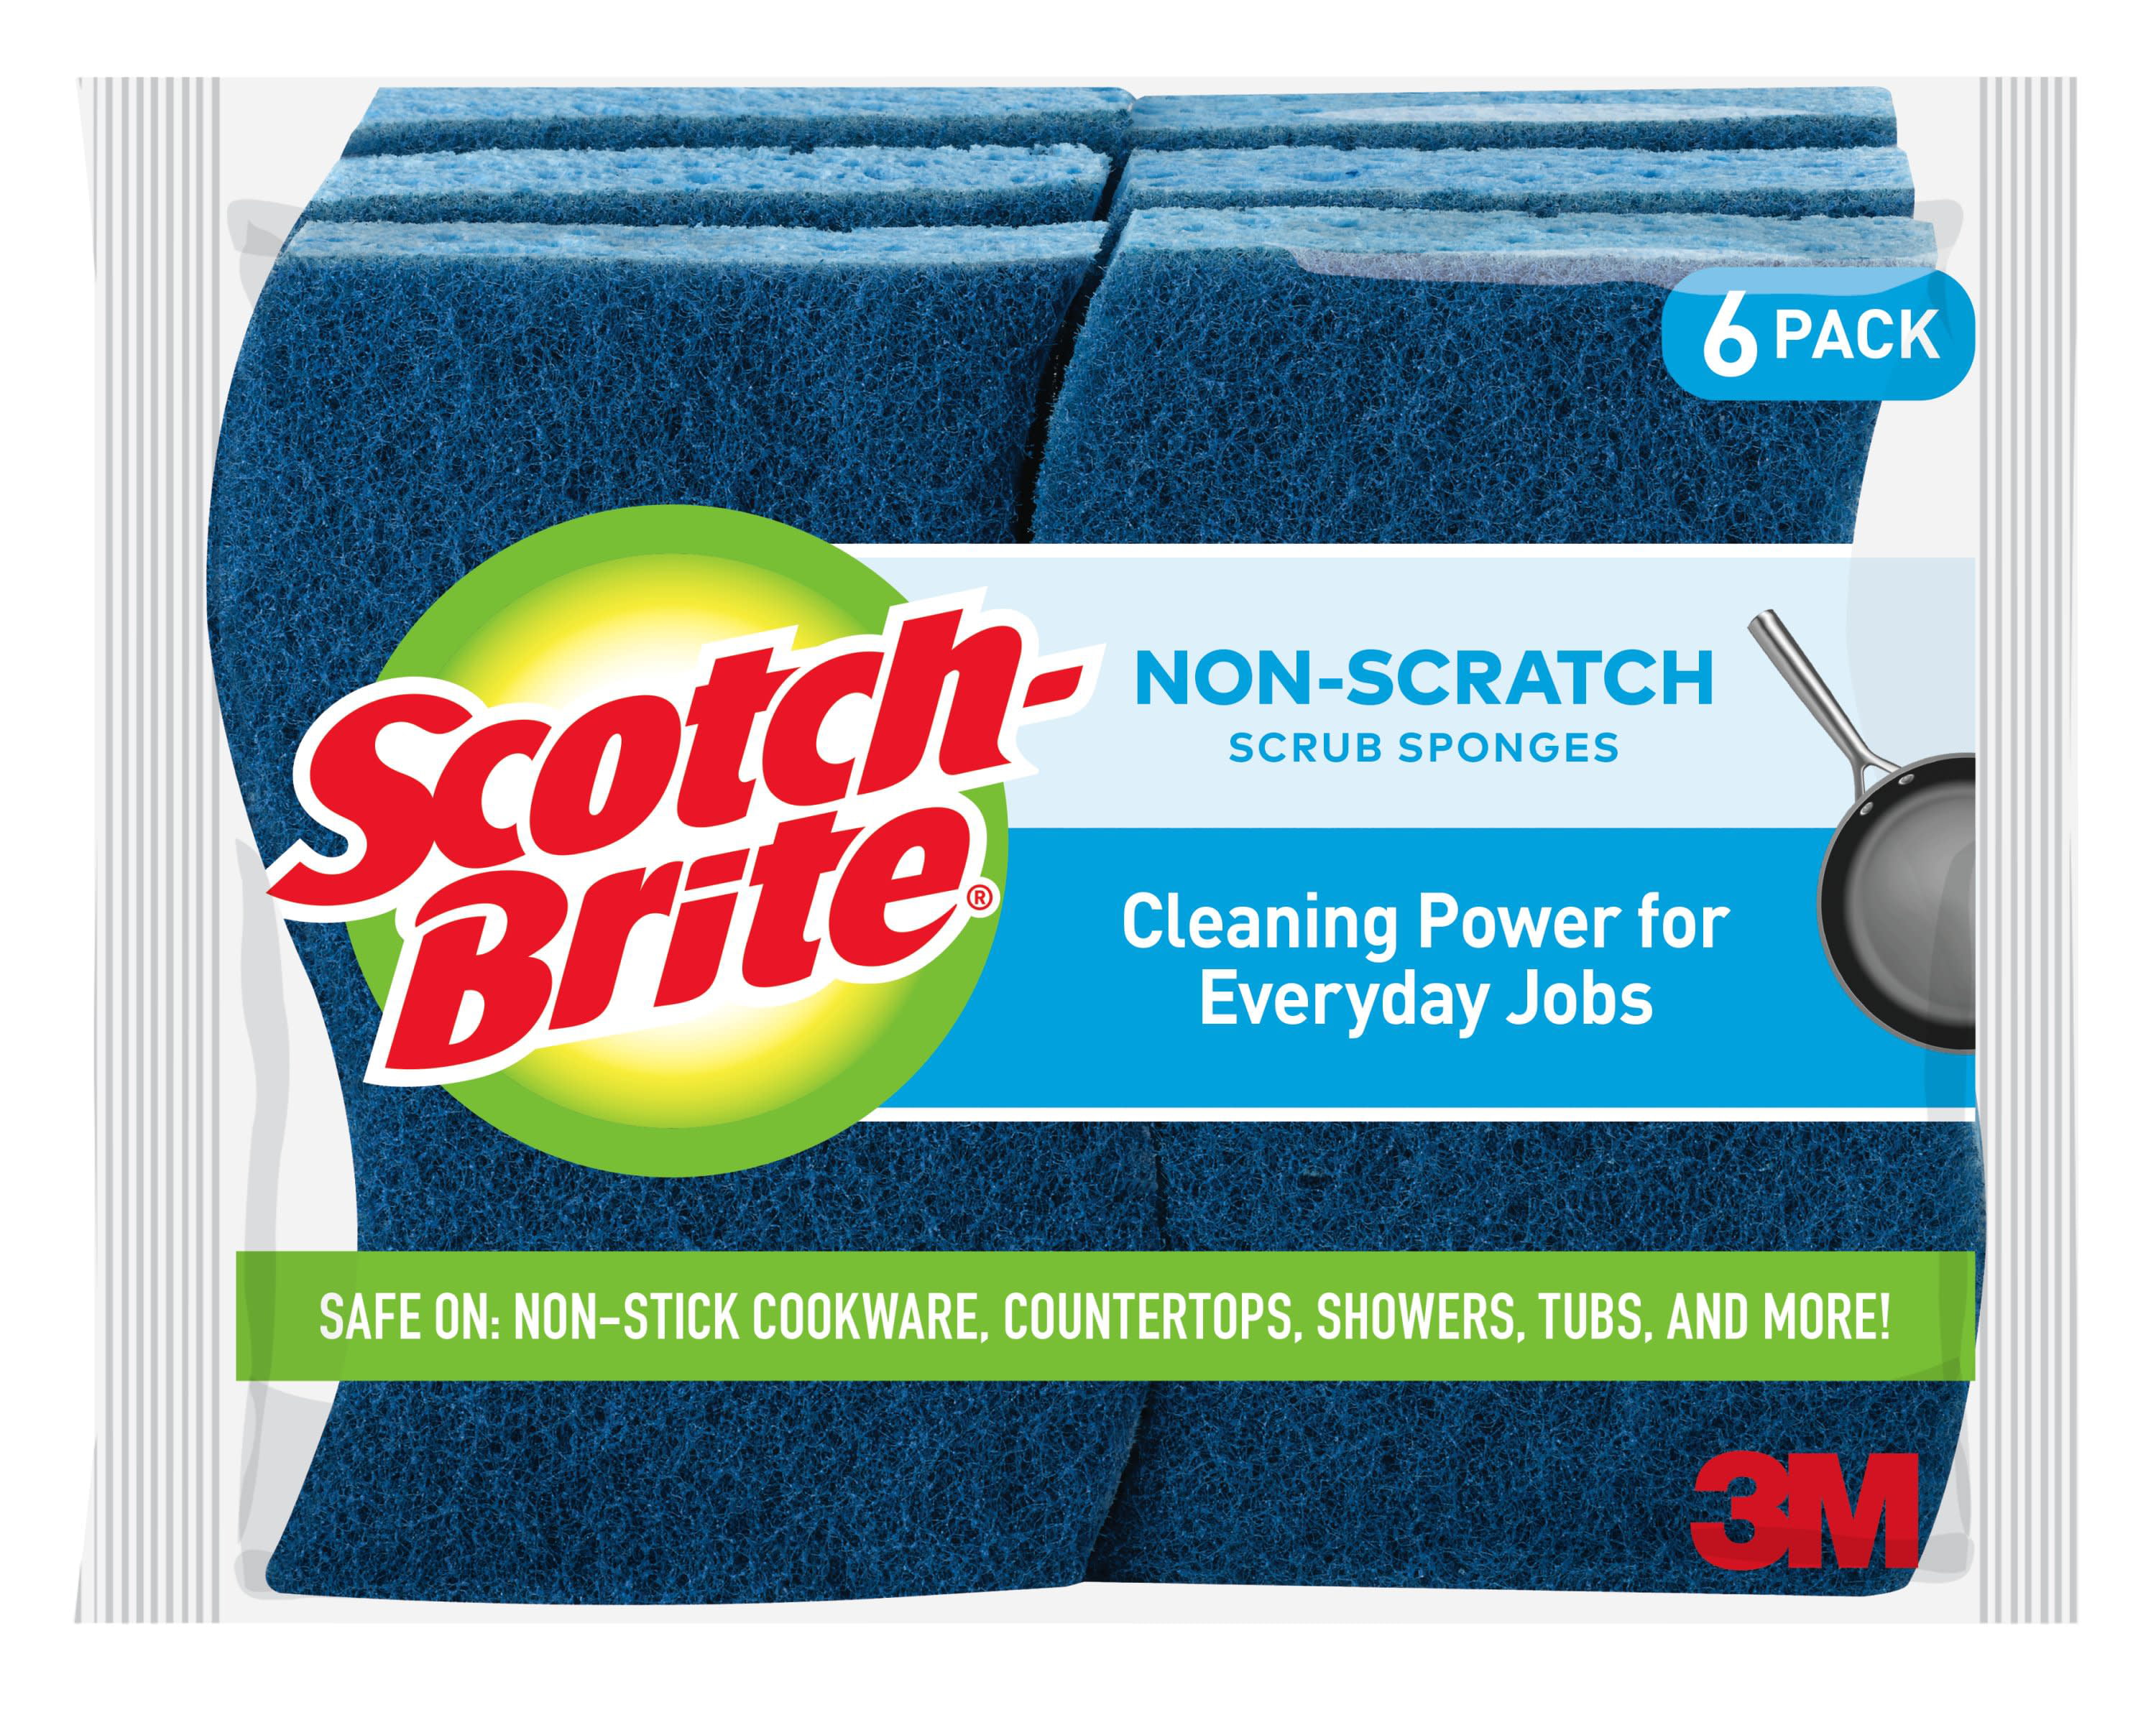 A set of 6 Cleaning Non-scratch Scrub Sponges/pads 